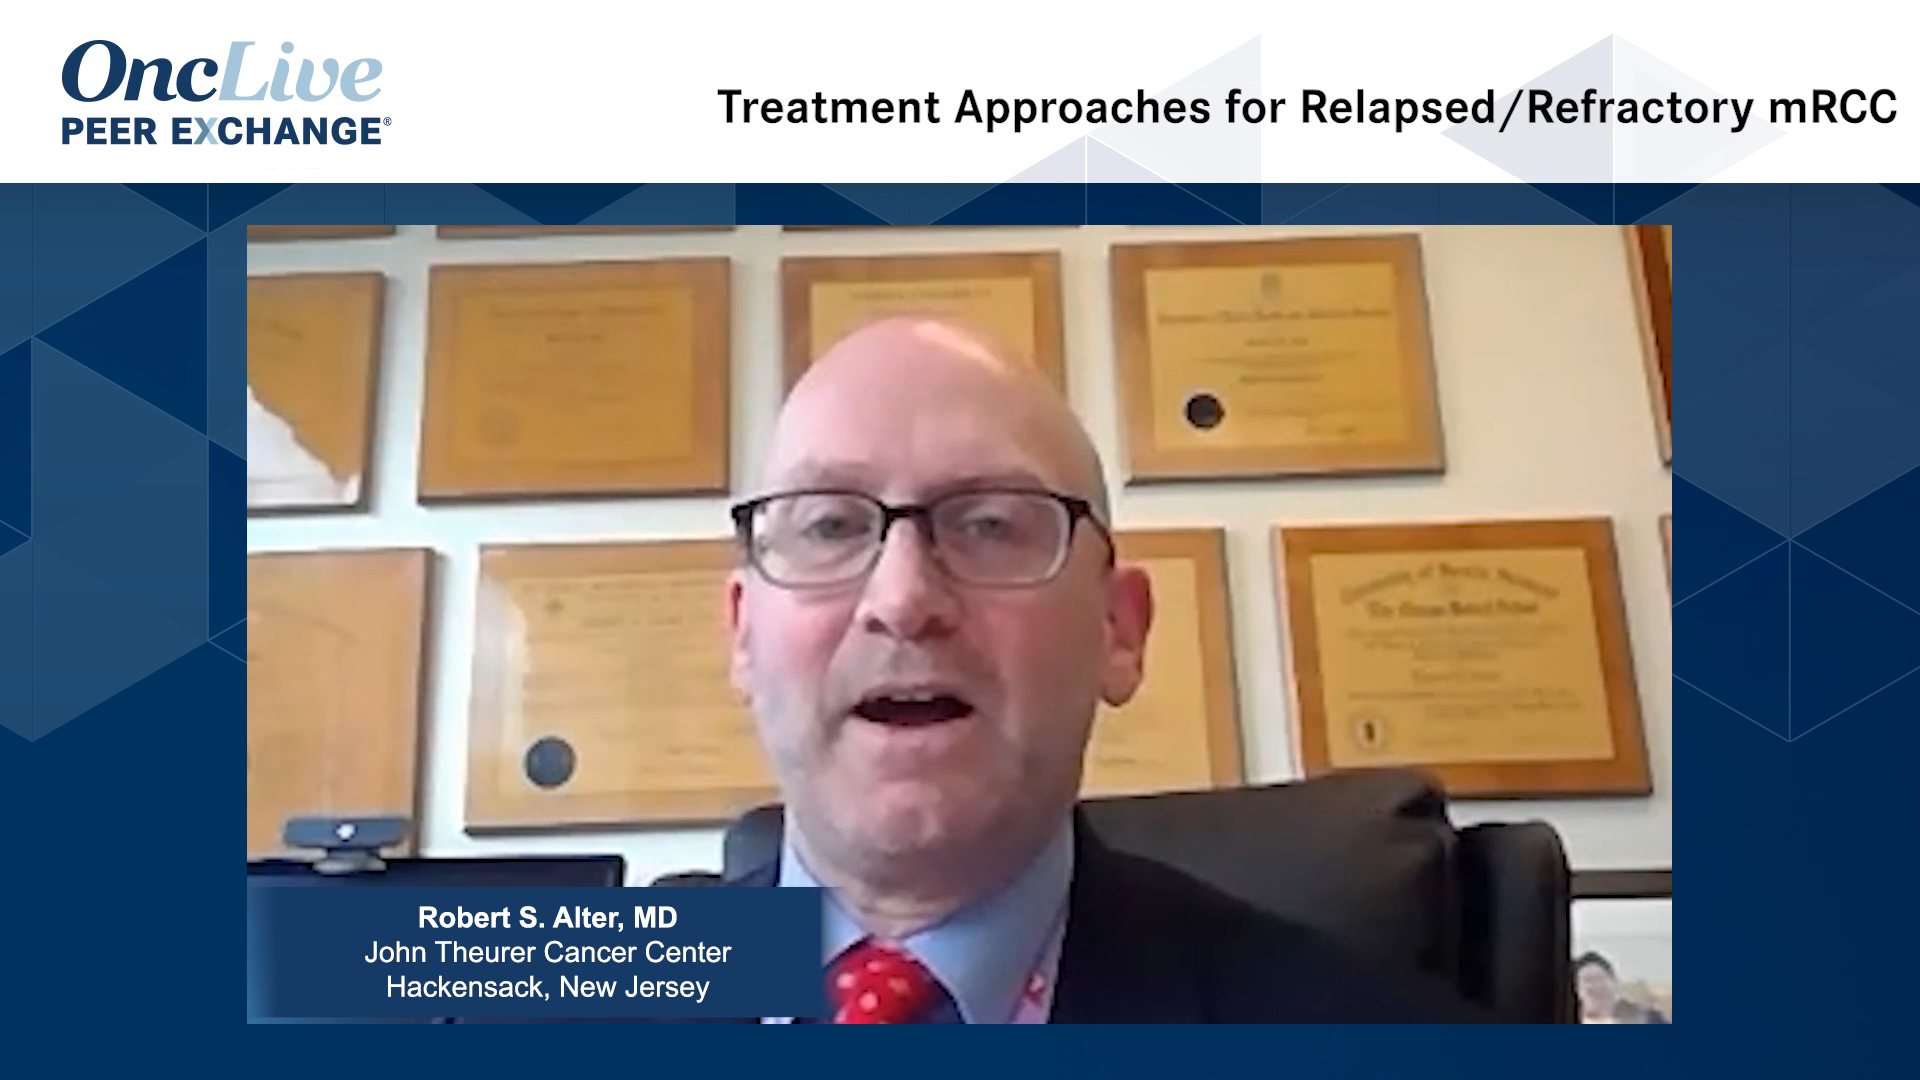 Treatment Approaches for Relapsed/Refractory mRCC